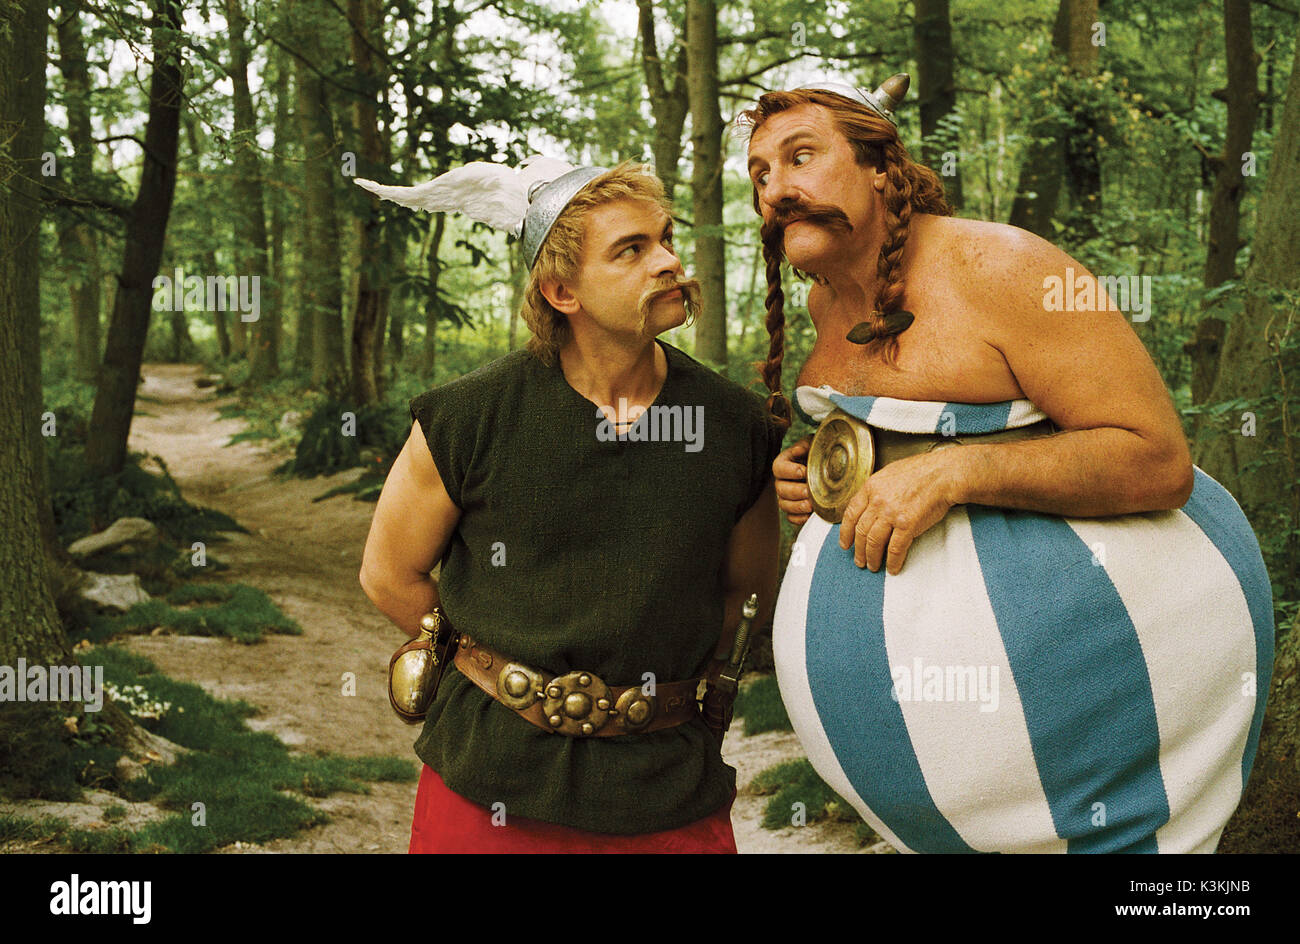 ASTERIX AUX JEUX OLYMPIQUES aka ASTERIX AT THE OLYMPIC GAMES CLOVIS CORNILLAC as Asterix, GERARD DEPARDIEU as Obelix       Date: 2008 Stock Photo